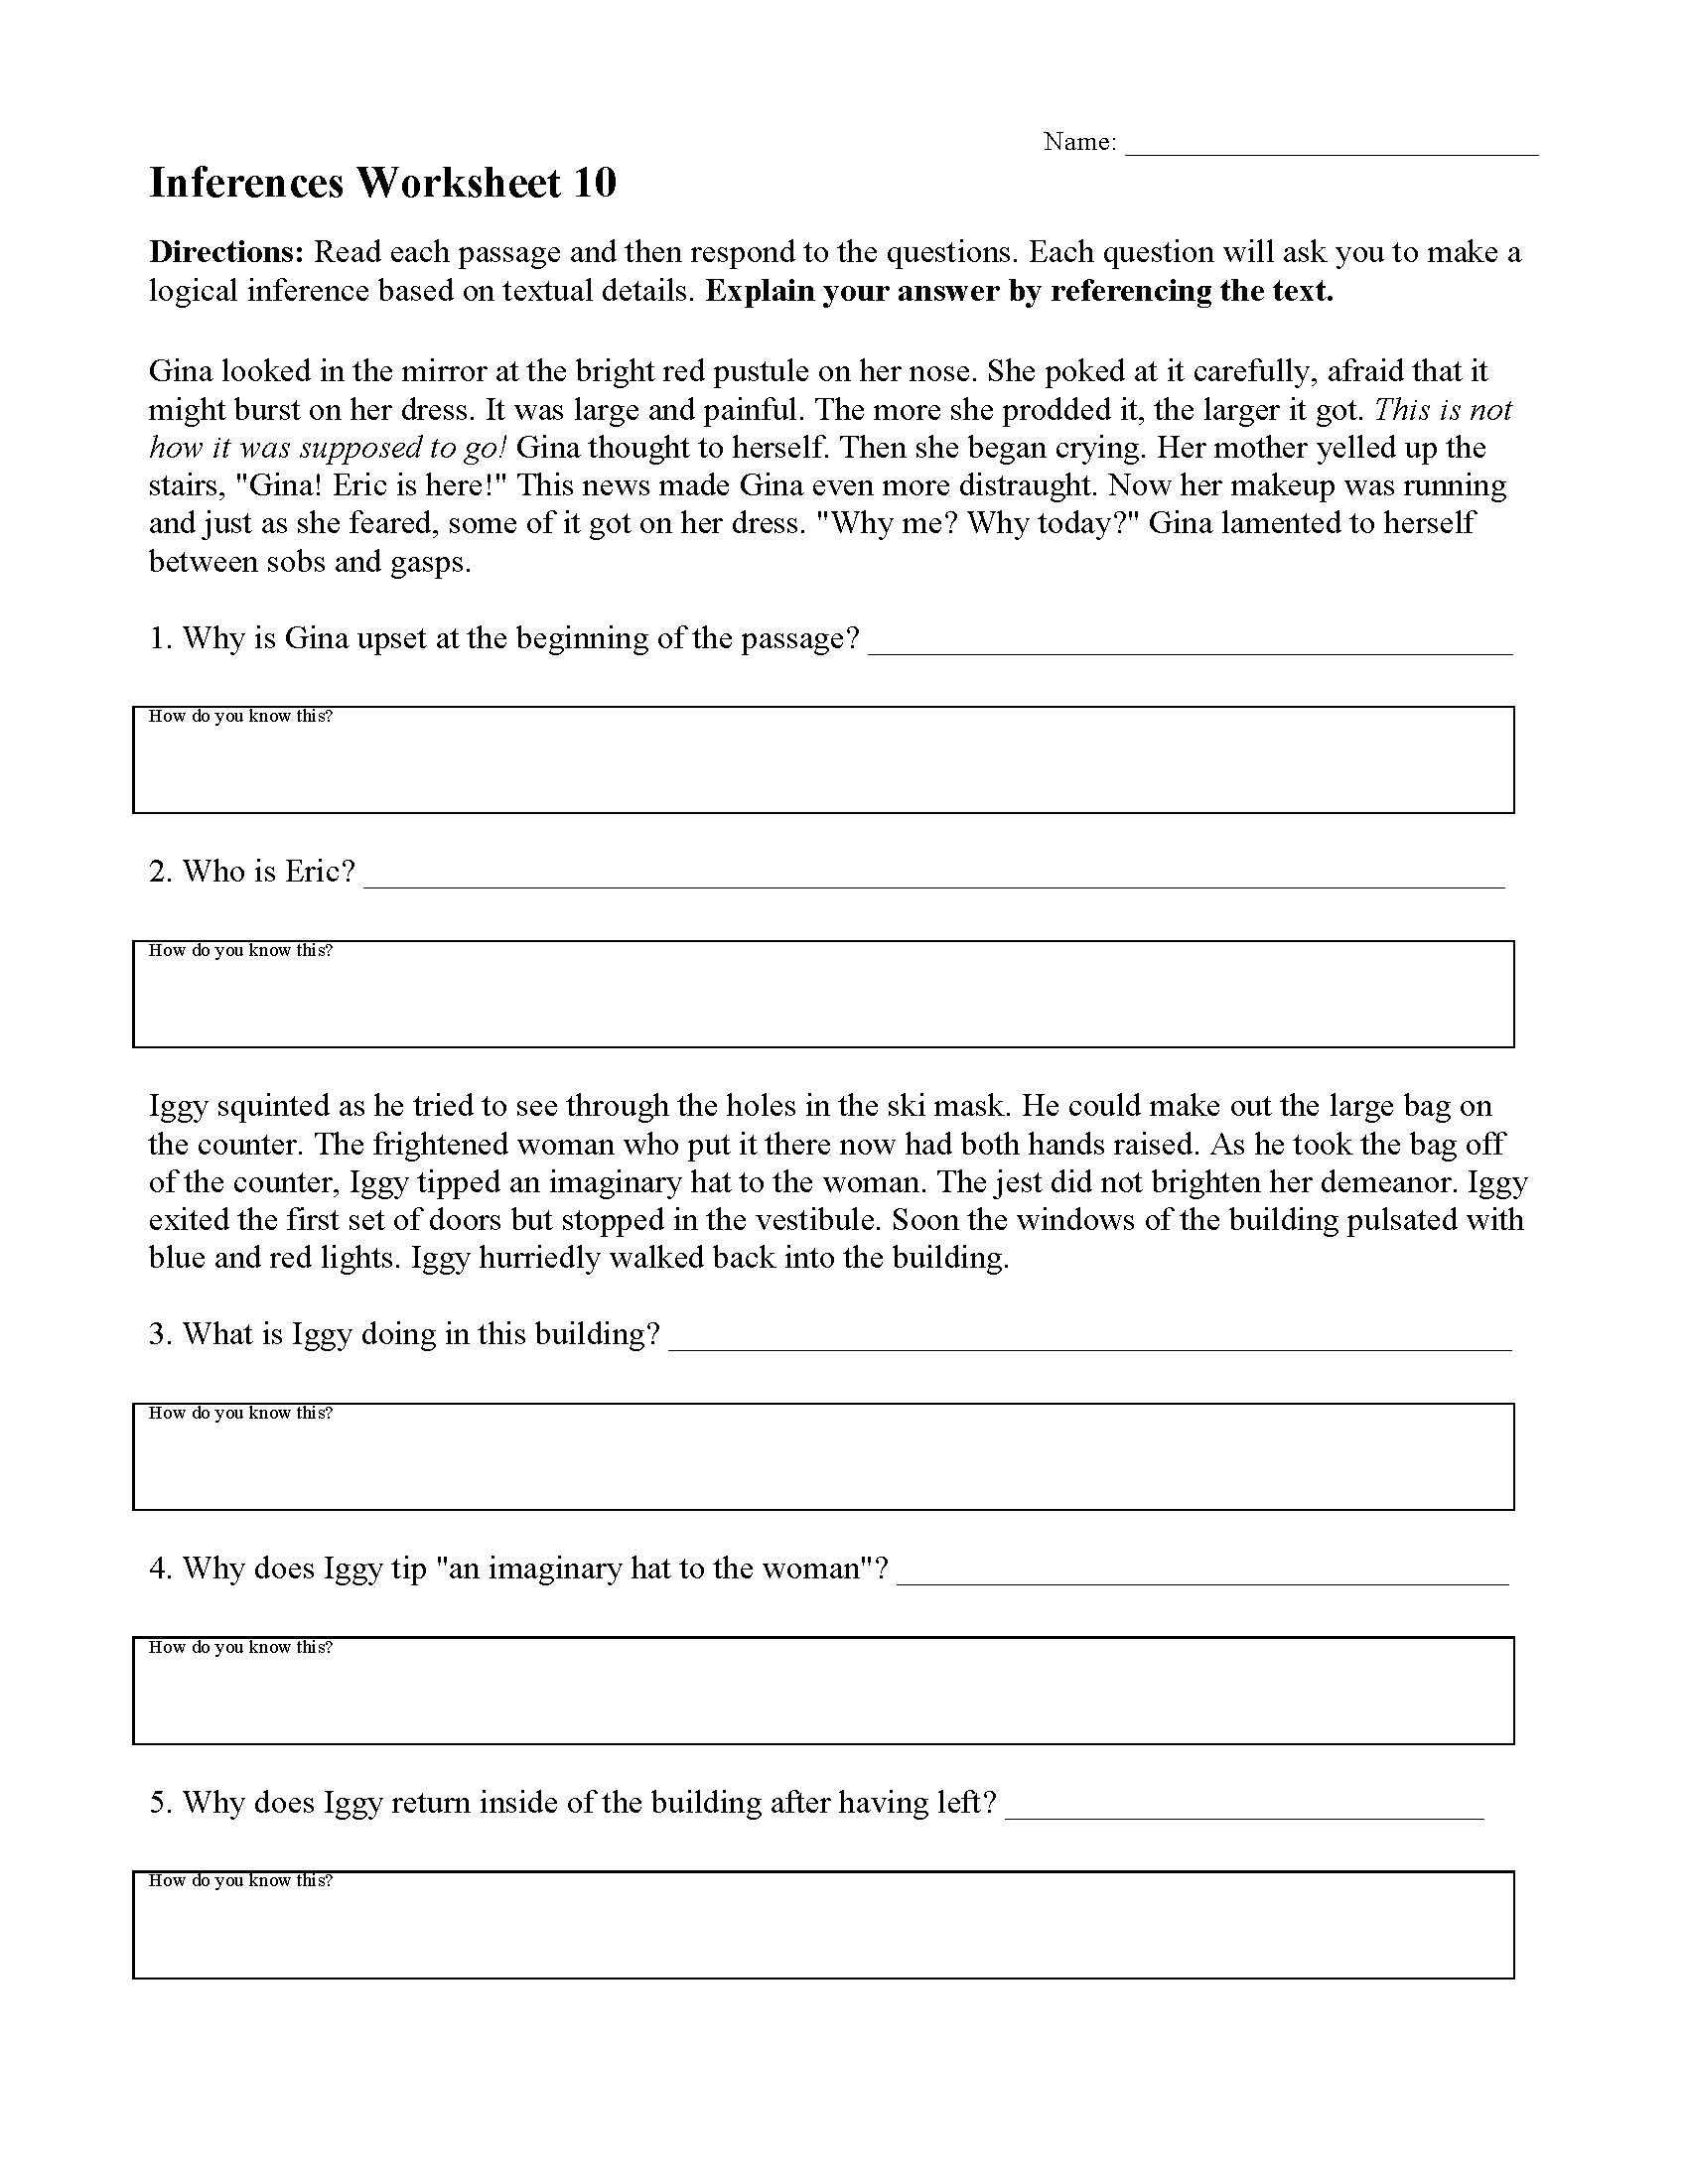 inferences worksheets reading activities